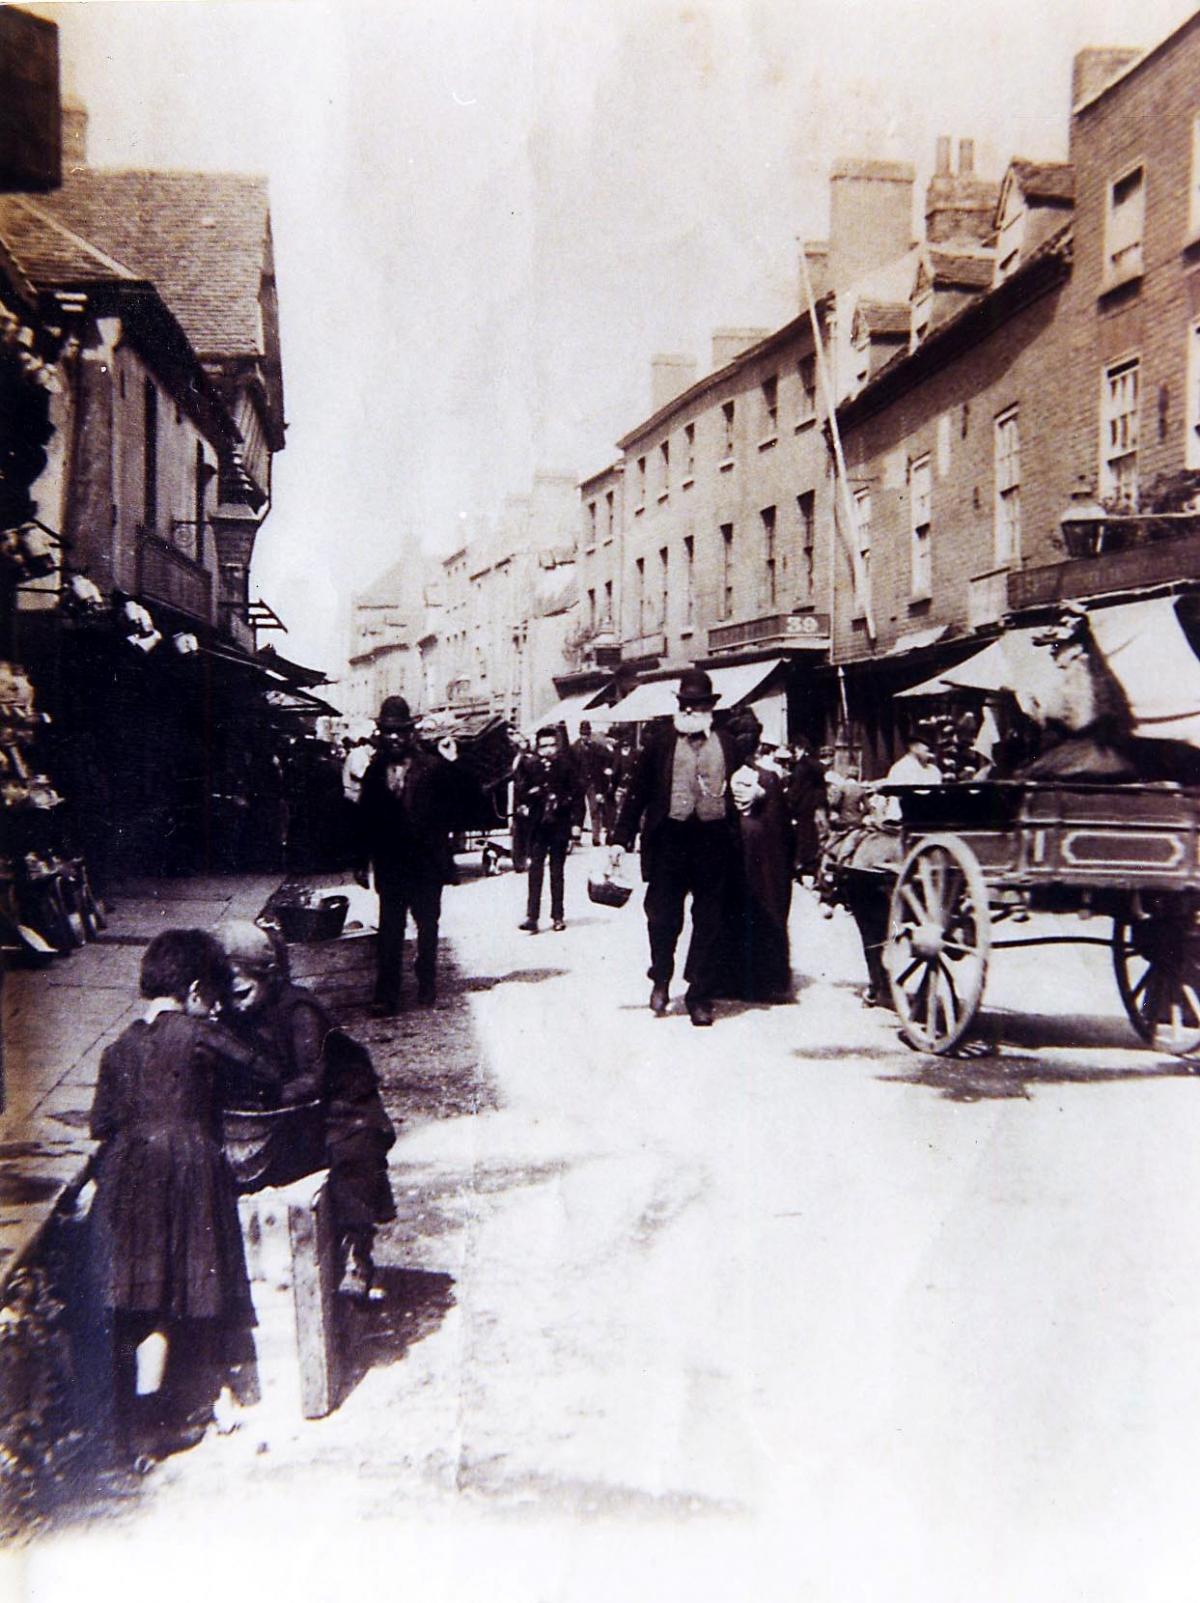 Vanished Worcester. A scene from the Shambles, Worcester, in Victorian times.